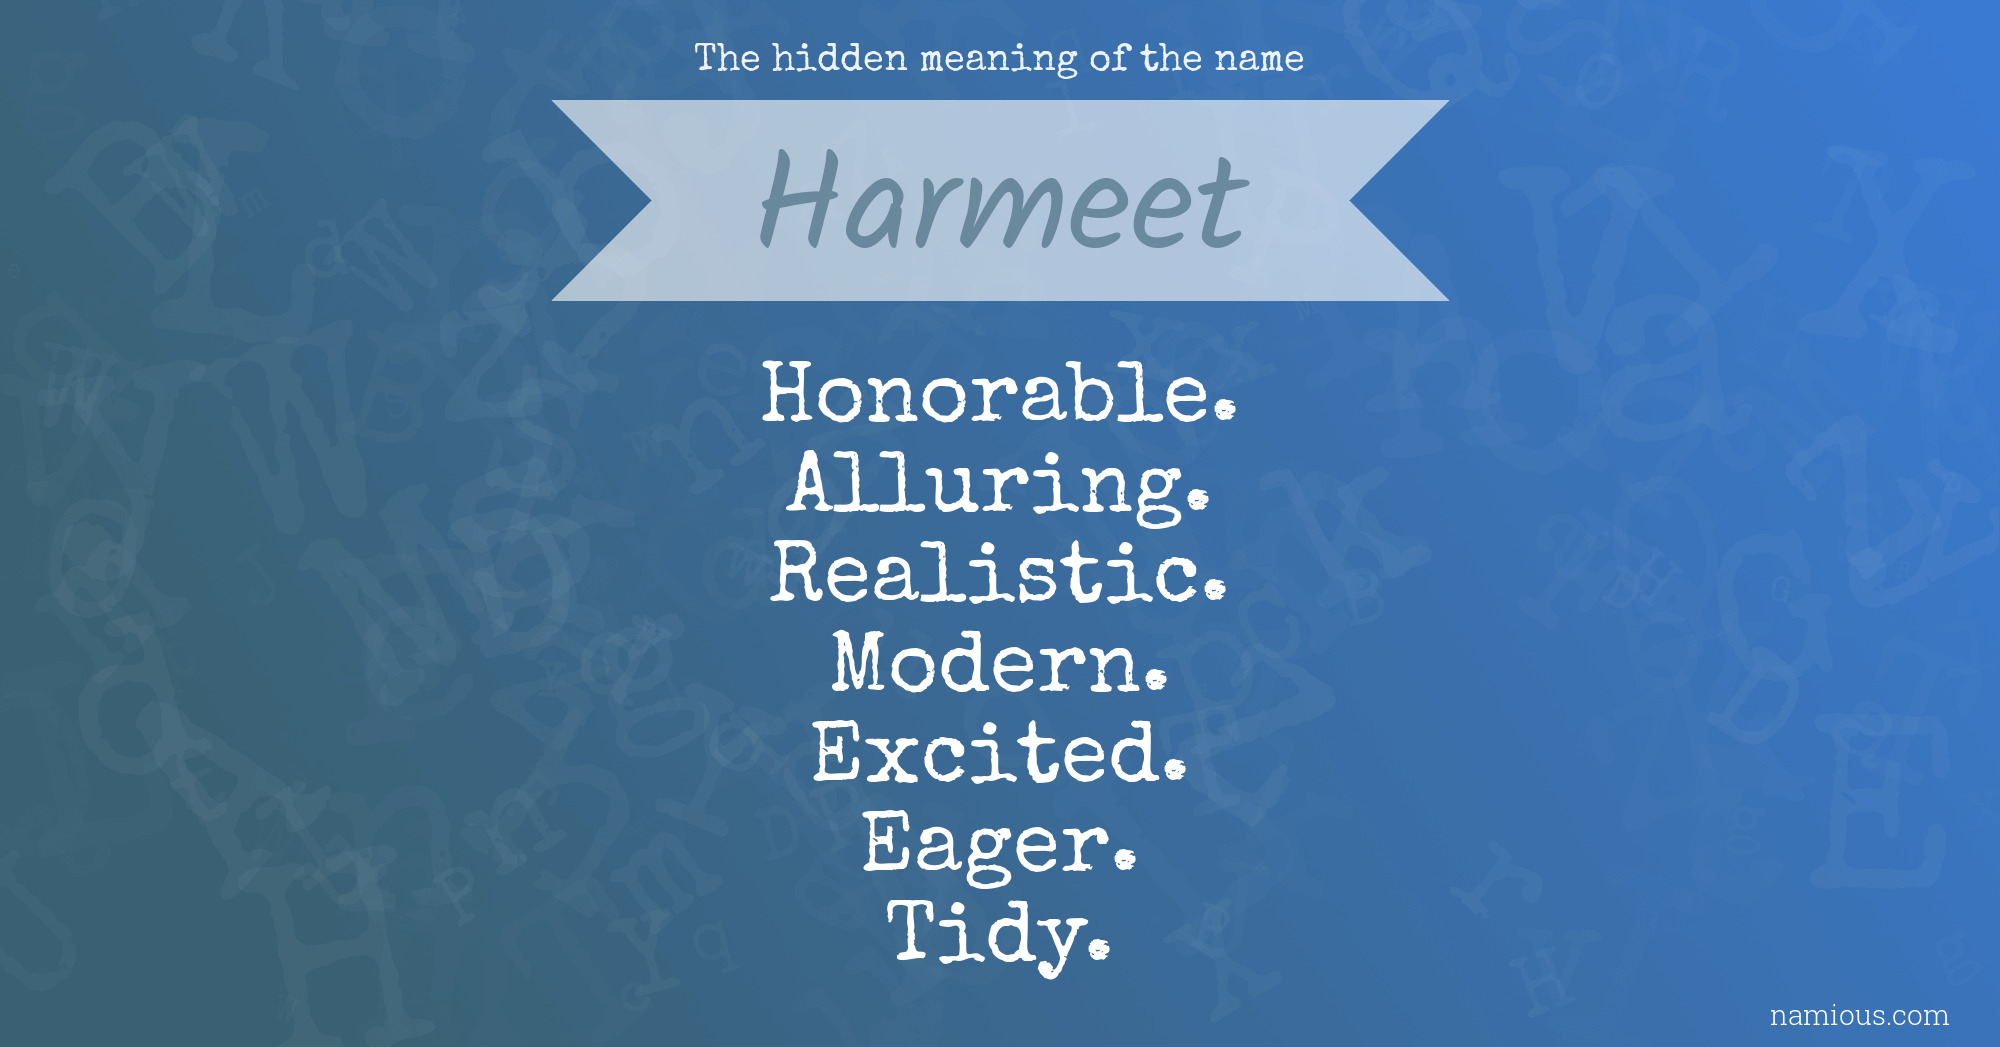 The hidden meaning of the name Harmeet